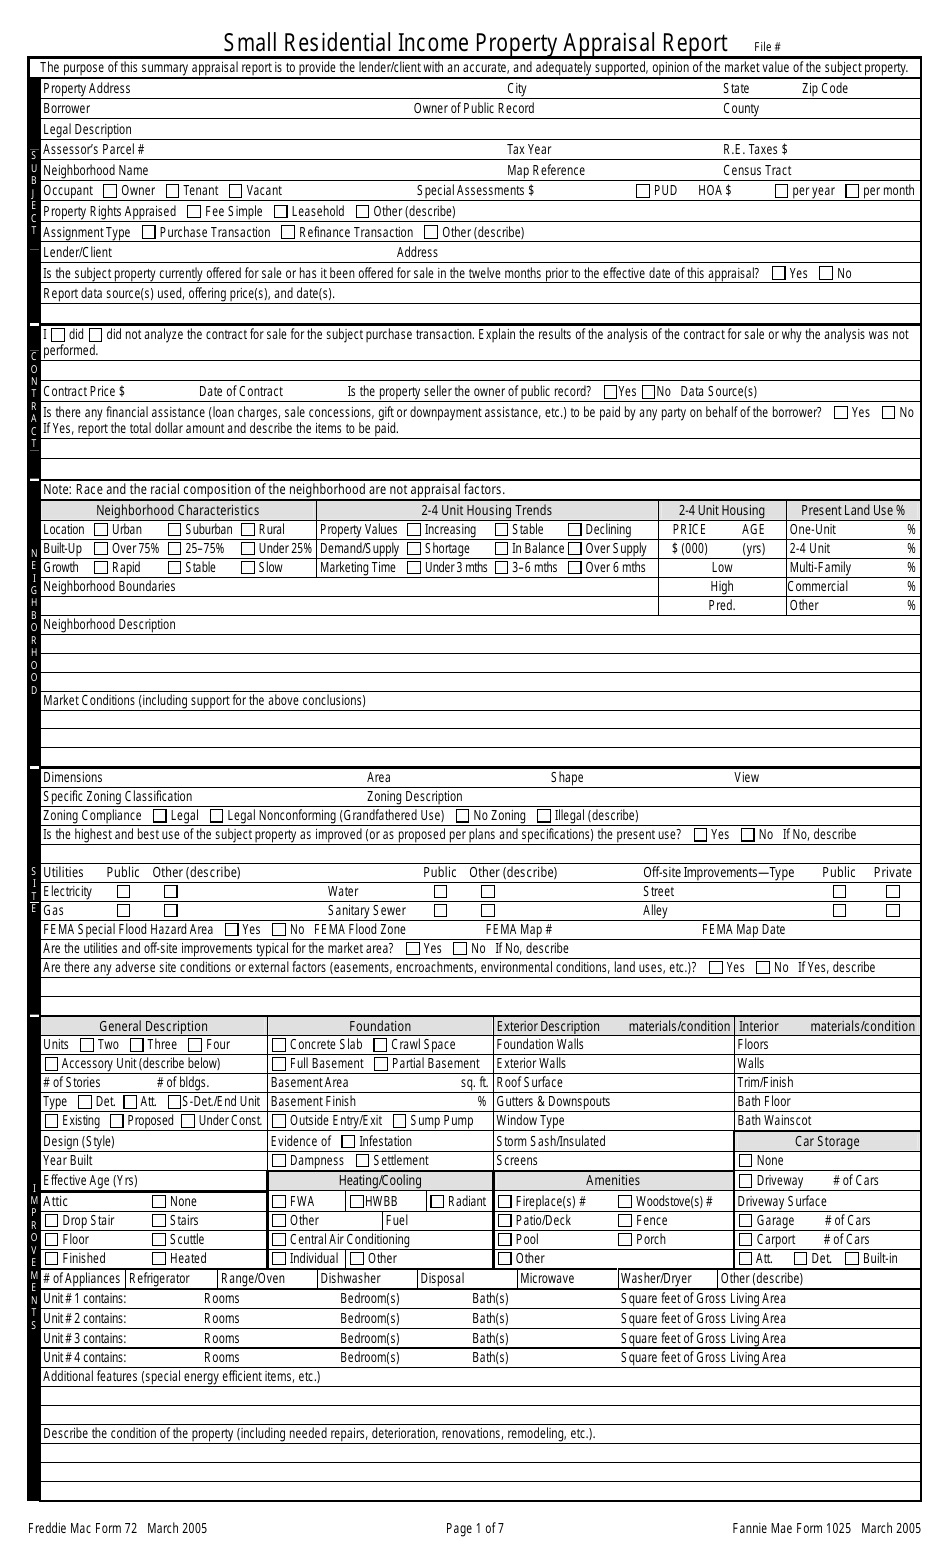 Fannie Mae Form 1025 Small Residential Income Property Appraisal Report, Page 1